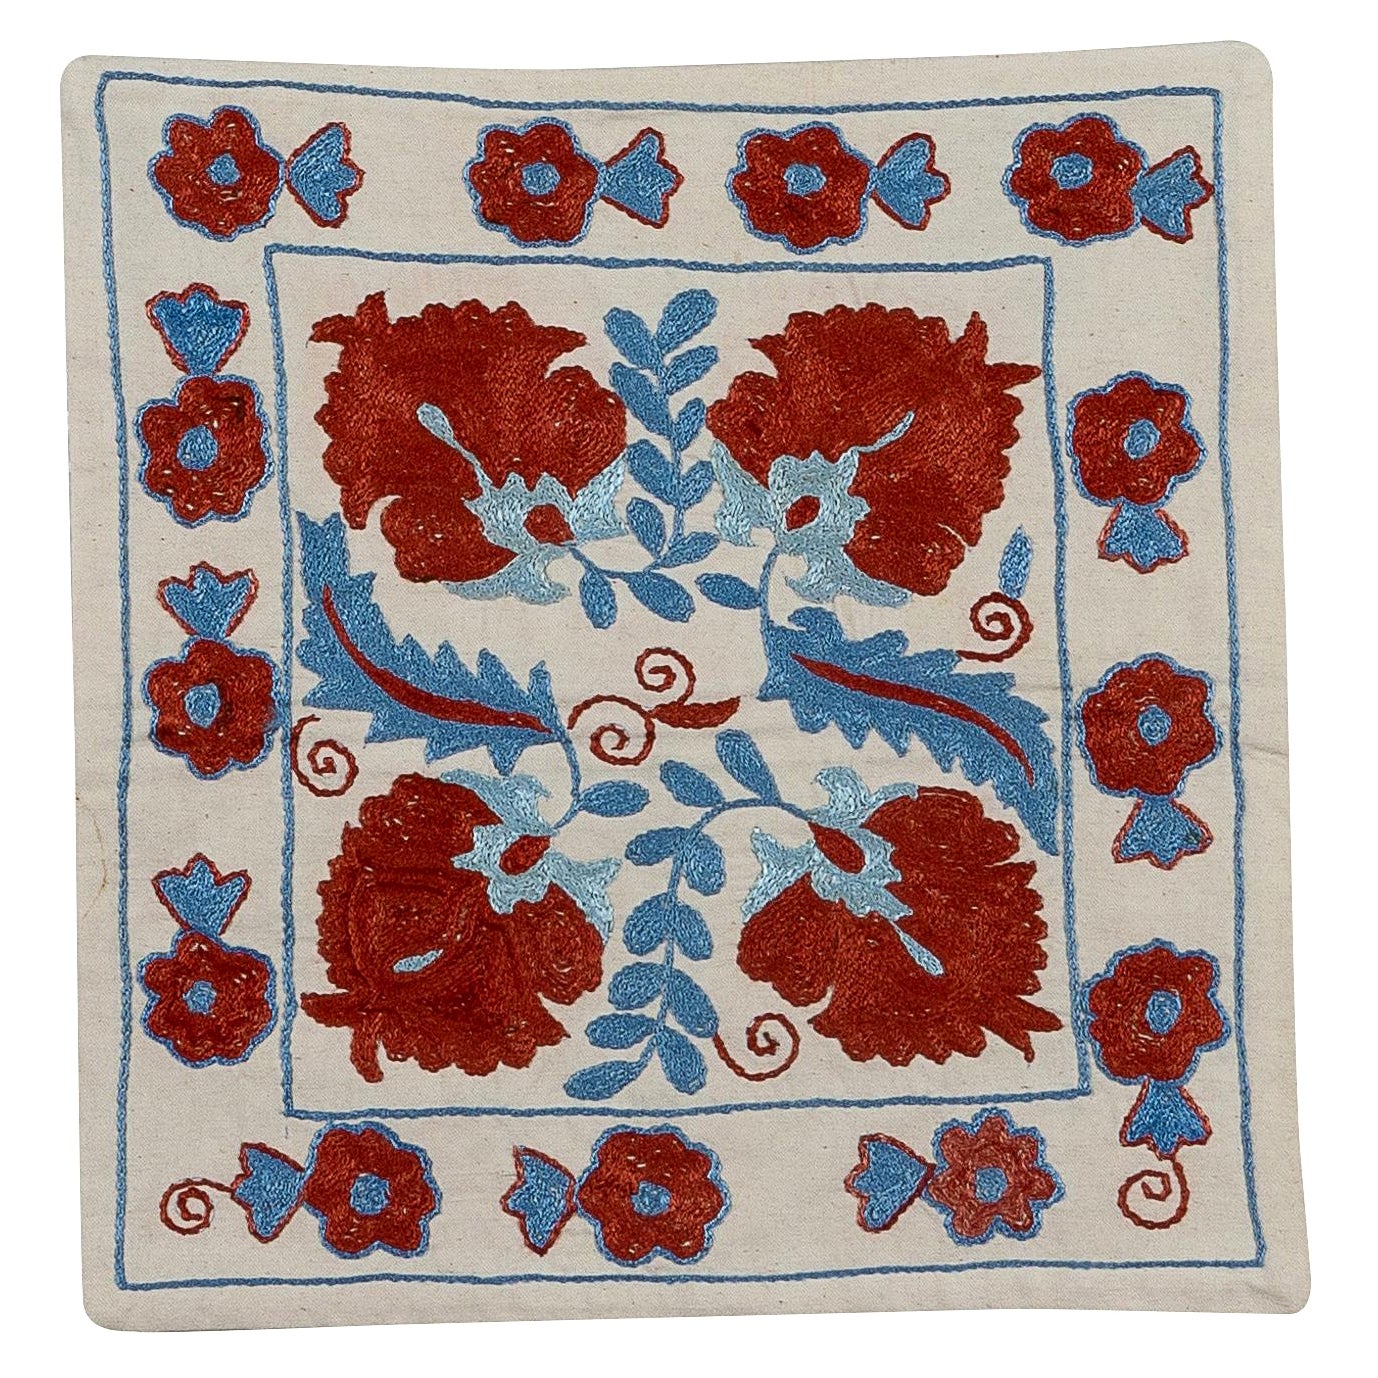  18"x24" New Uzbek Silk Embroidery Cushion Cover in Red, Blue and Cream For Sale